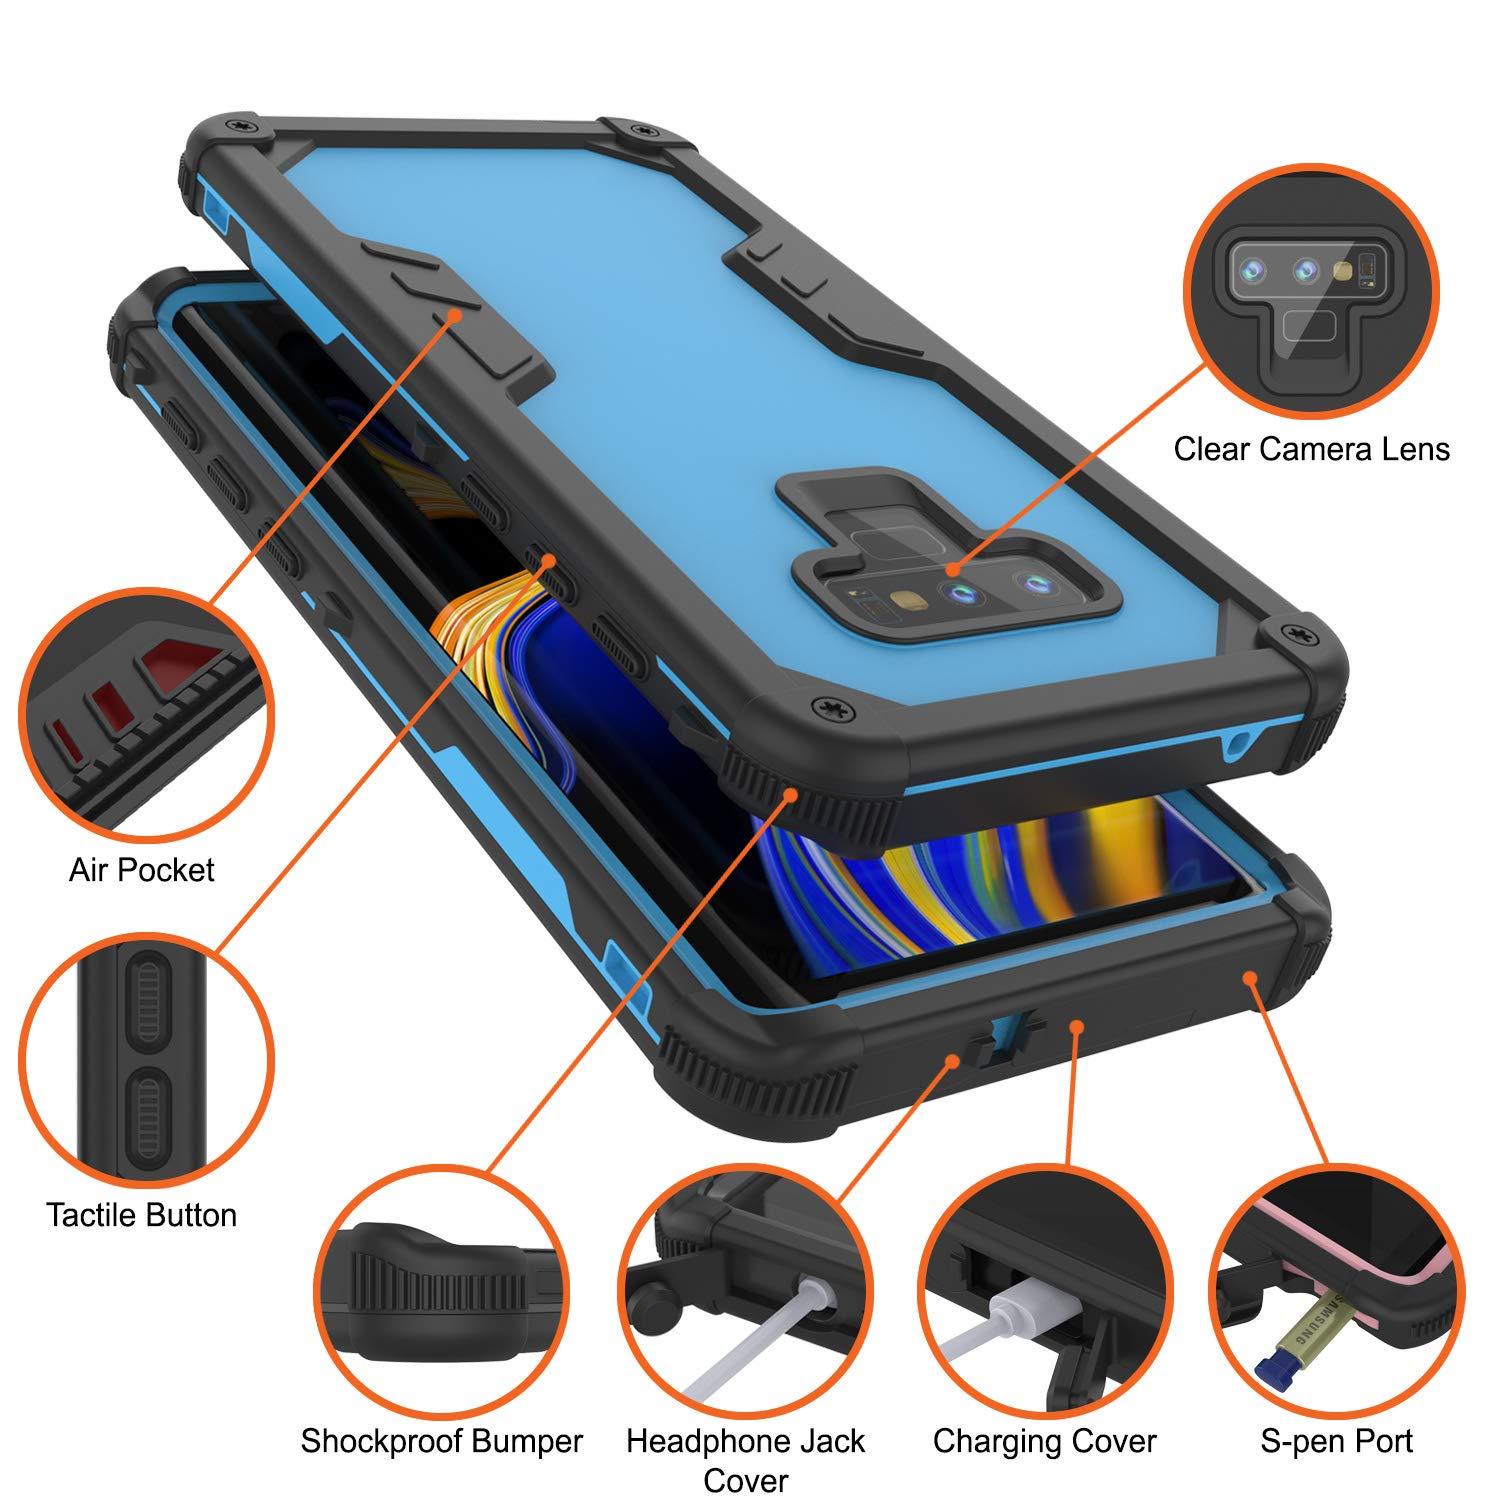 Punkcase Galaxy Note 9 Waterproof Case [Navy Seal Extreme Series] Armor Cover W/ Built In Screen Protector [Light Blue]